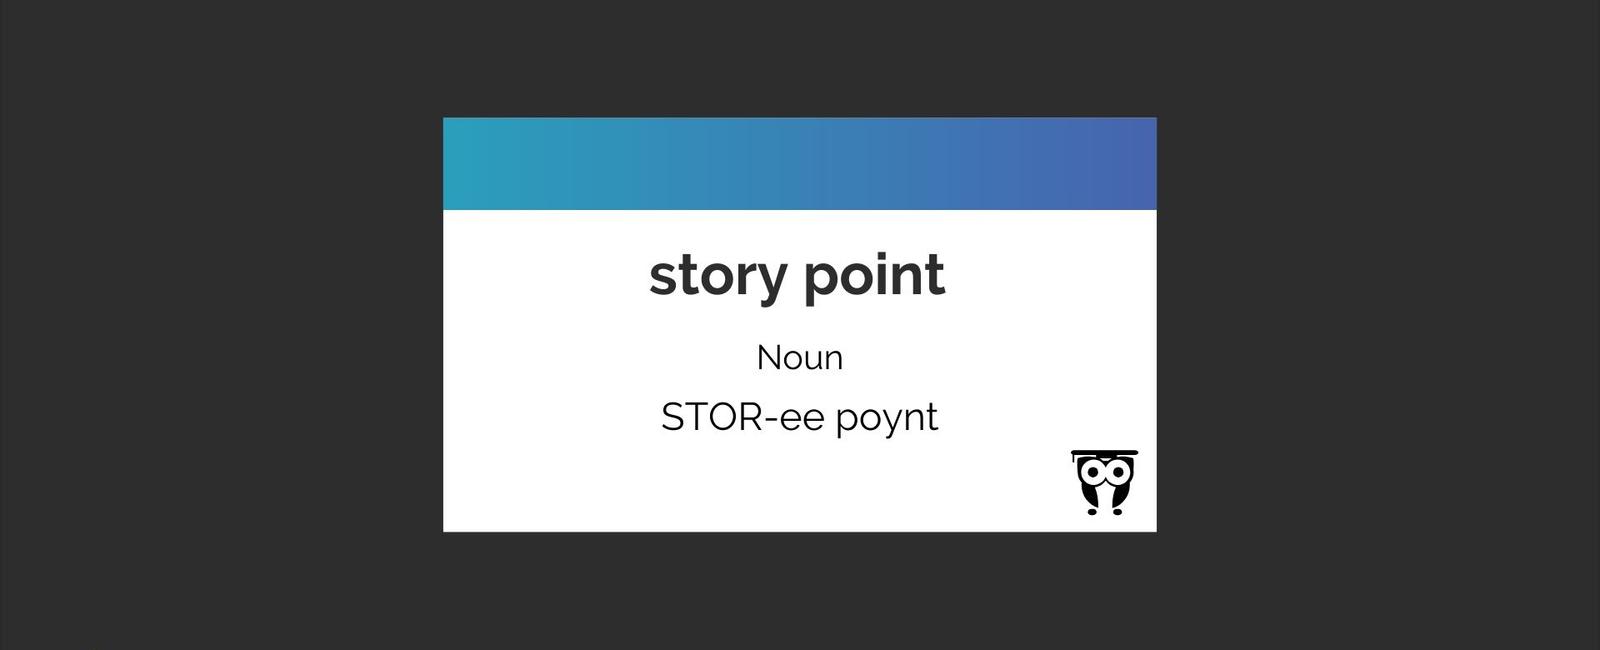 Story Point